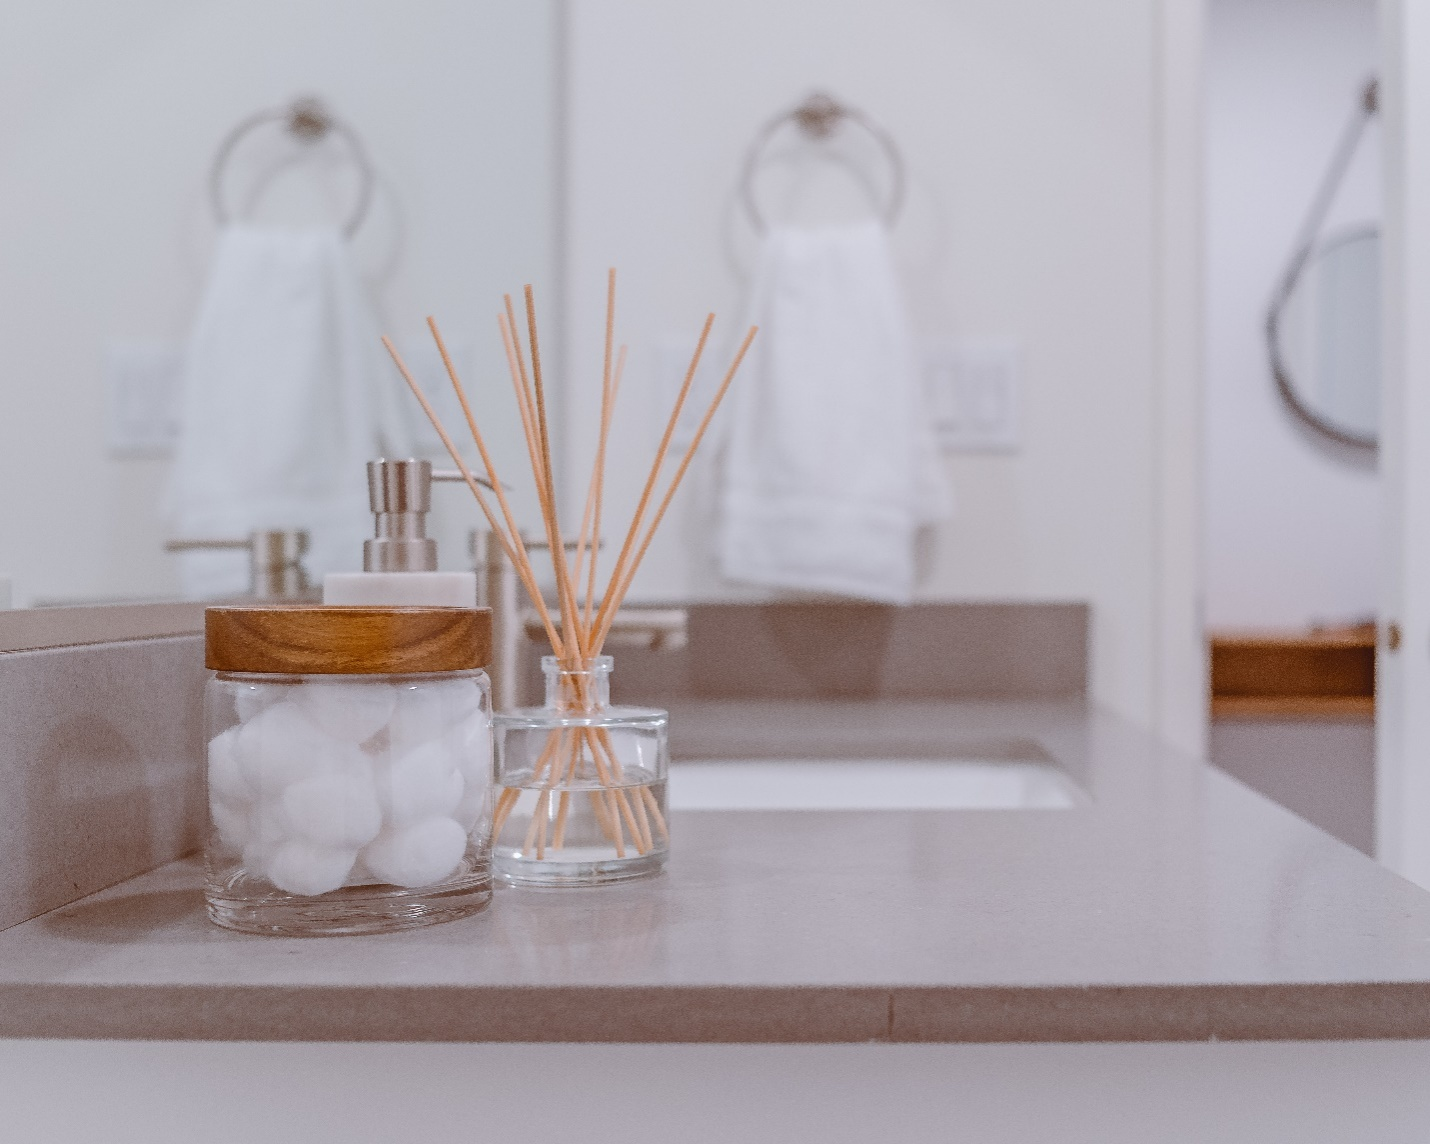 Cottons and a diffuser placed on a bathroom countertop.